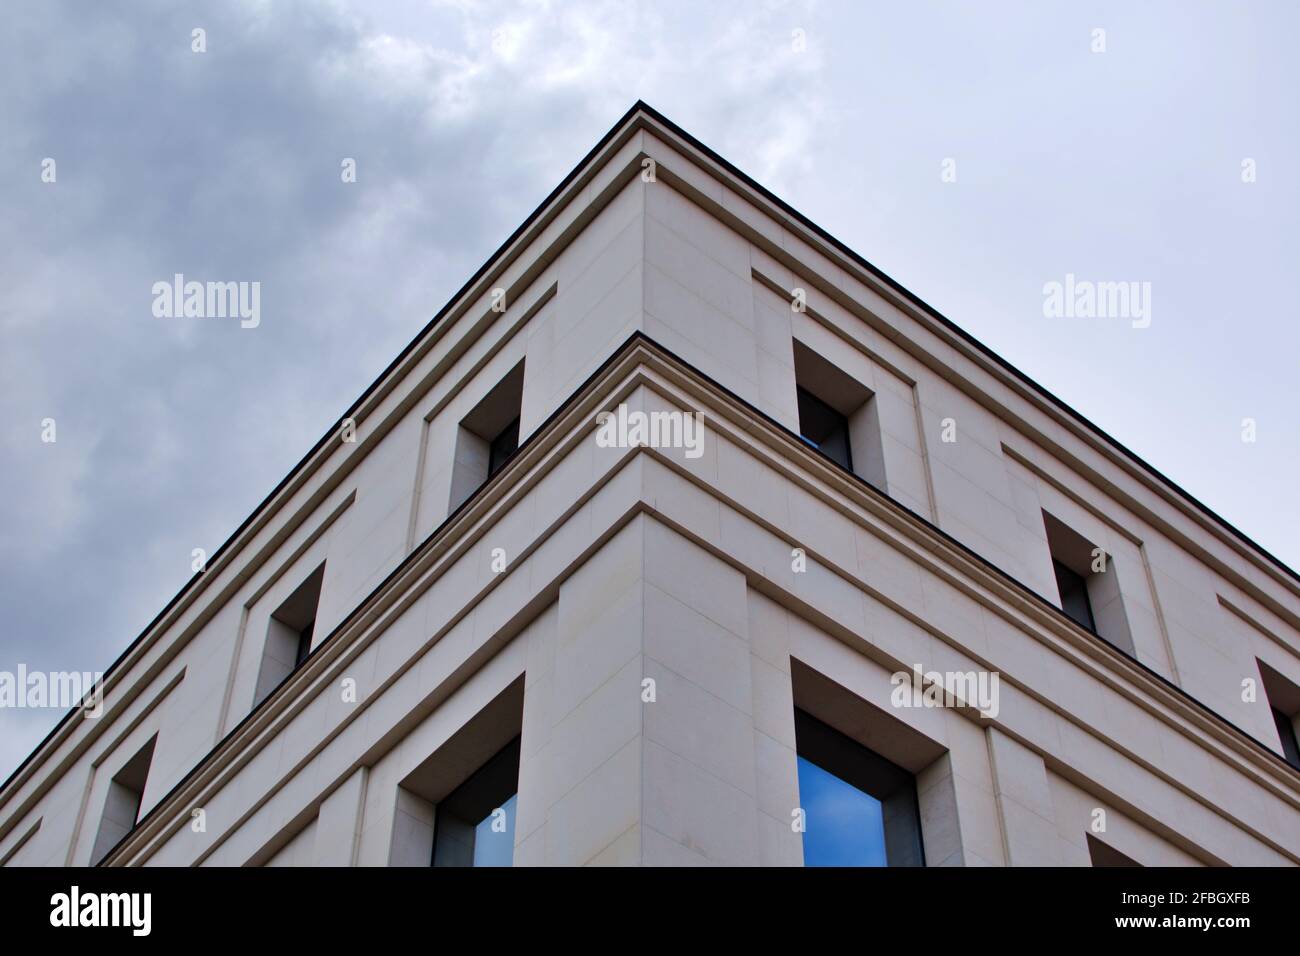 Building facade. Corner of house with windows by the edges against stormy sky Stock Photo